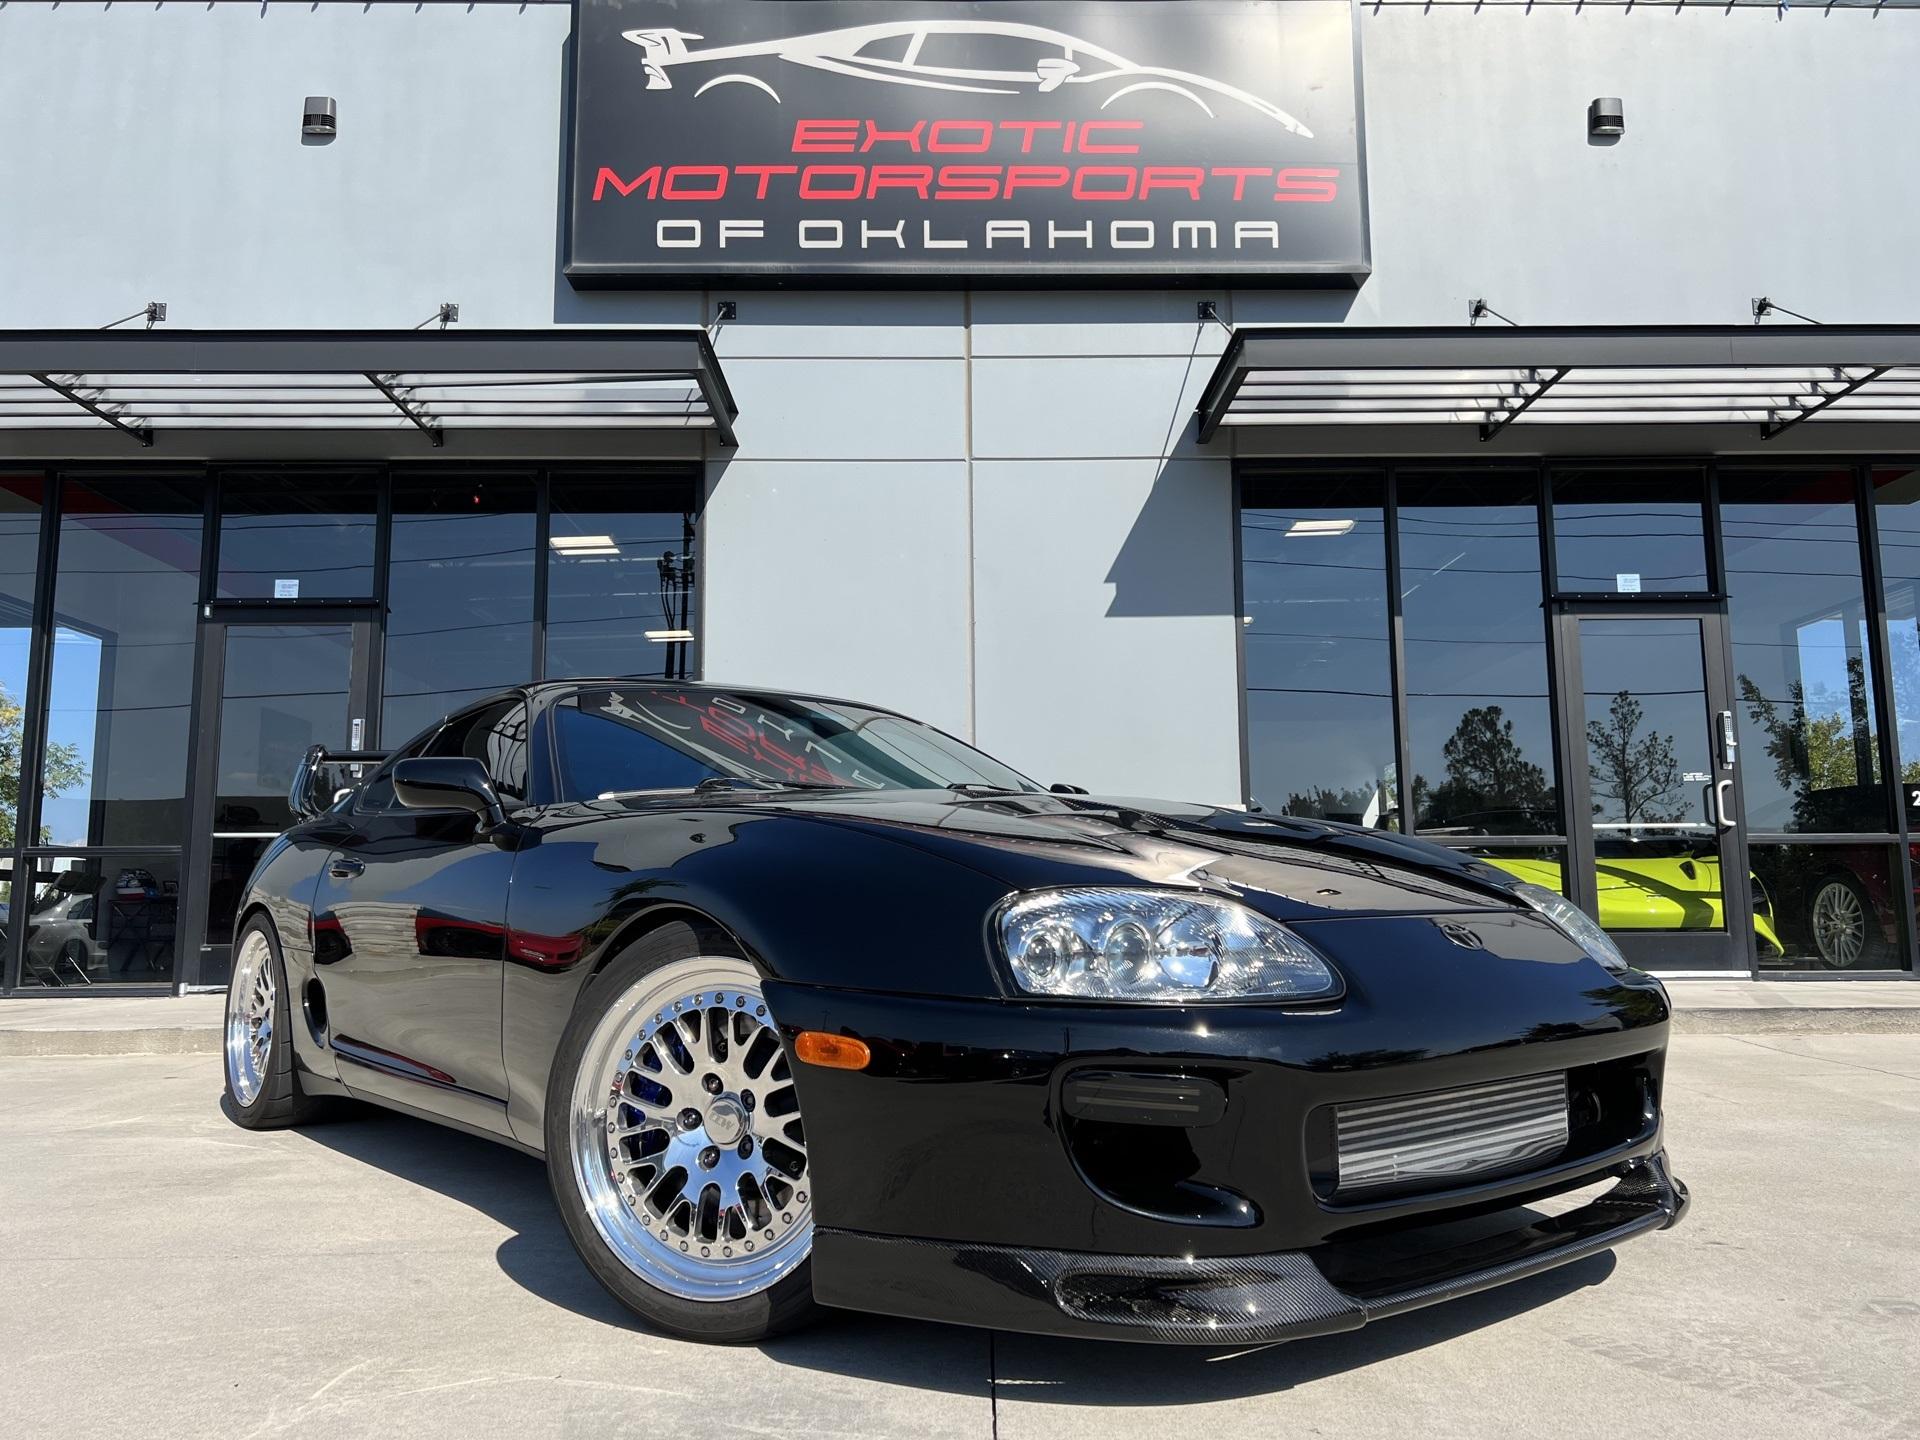 Used 1997 Toyota Supra Turbo Manual 6 Speed 1000rwhp Jotech Build For